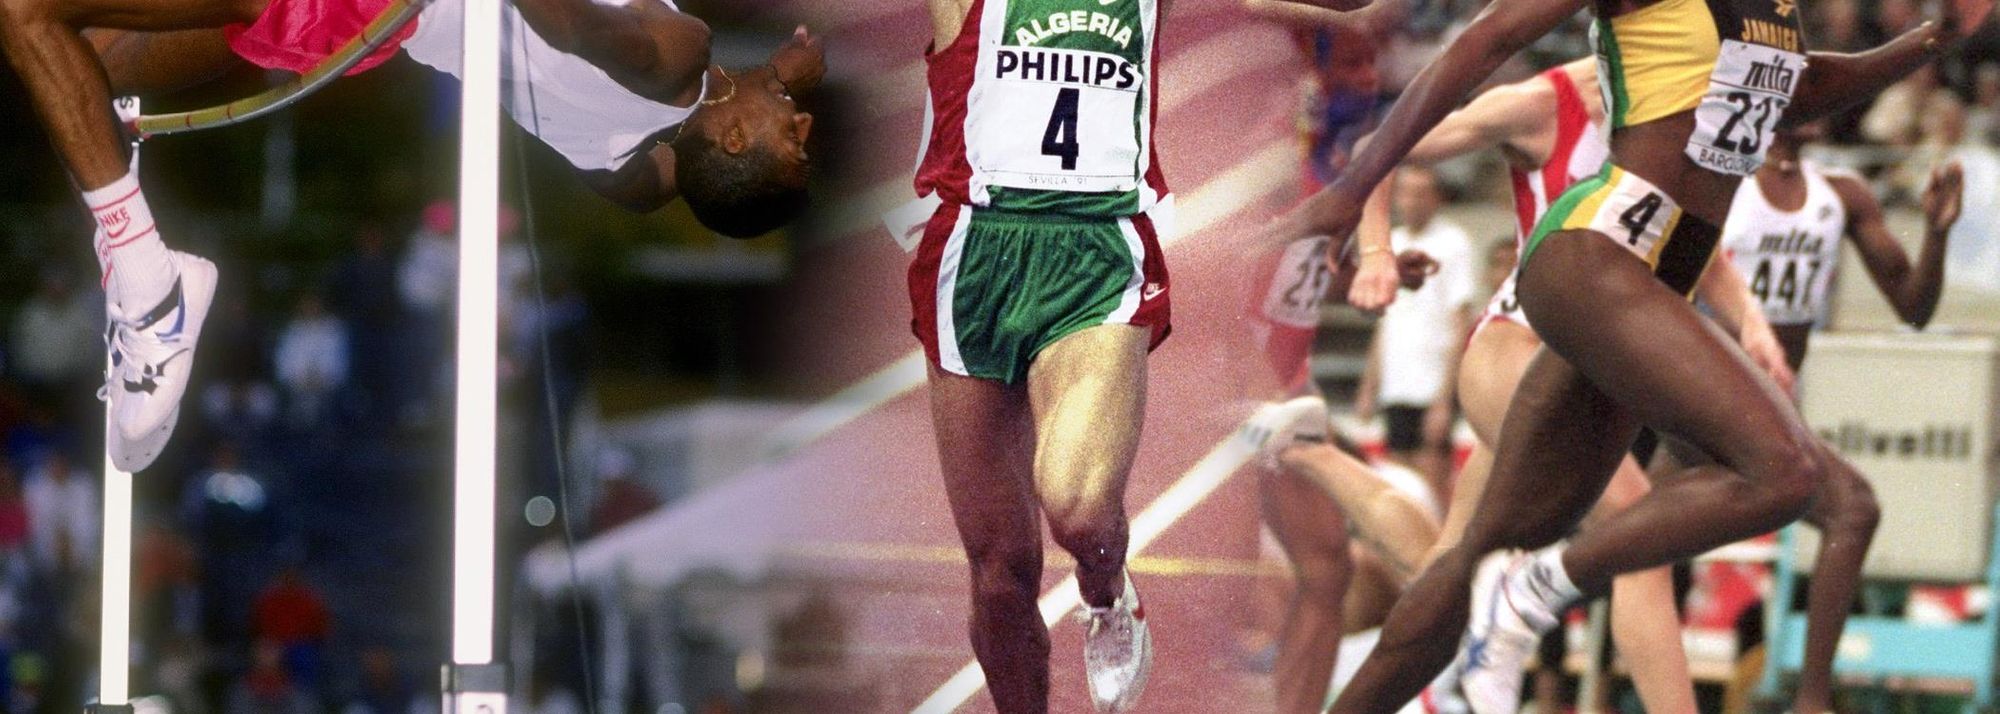 The third edition of the World Indoor Championships, staged 30 years ago in Seville's Palacio De Los Deportes from 8-10 March 1991, proved – in terms of records – to be the best yet.